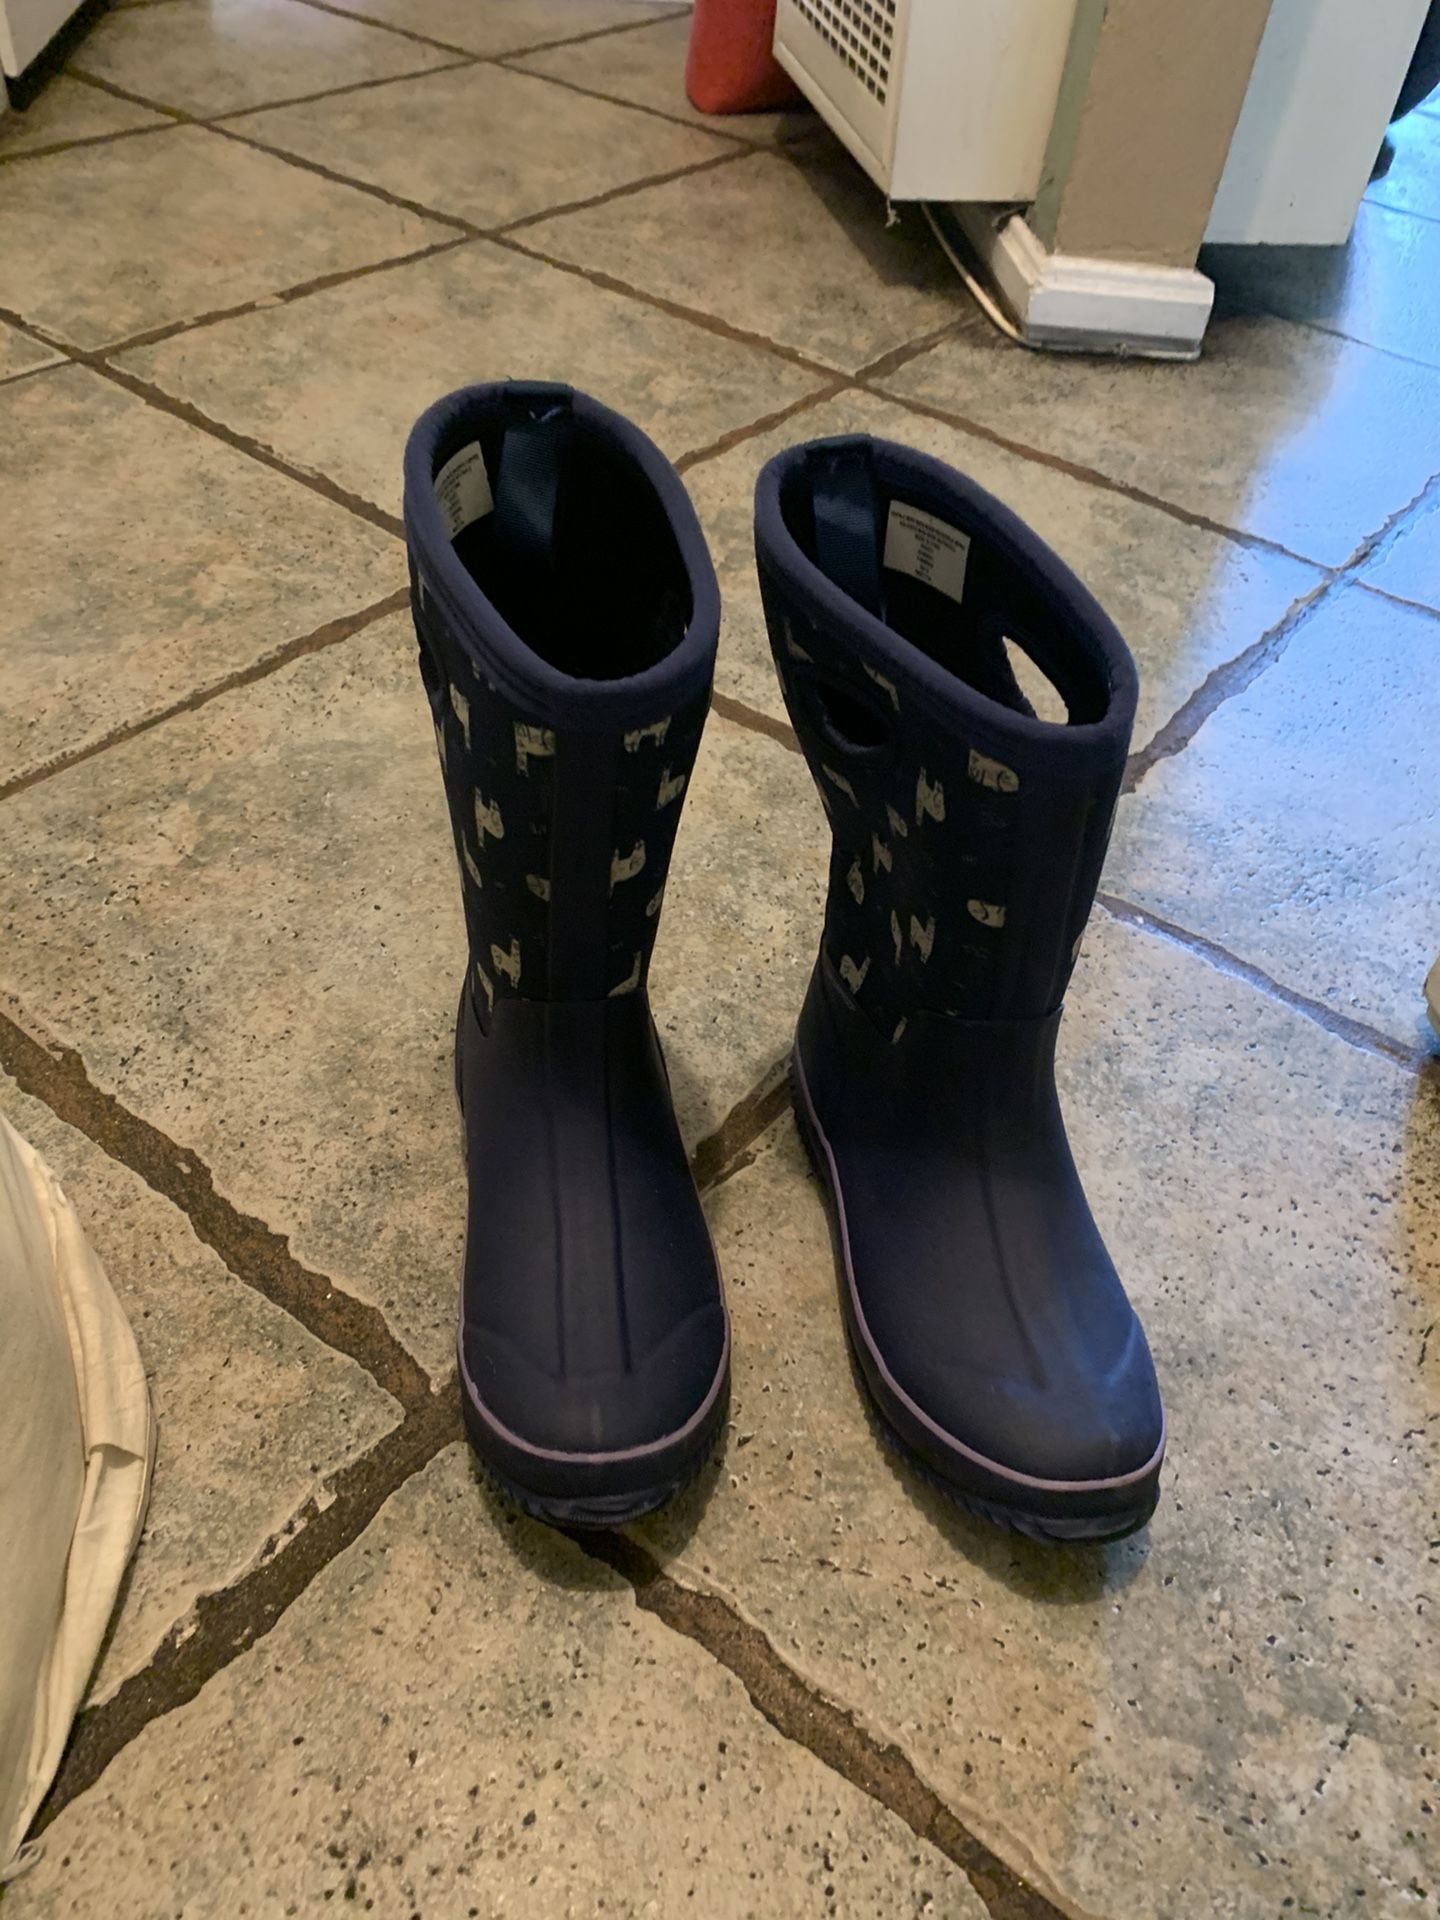 Snow boots for girls size 4